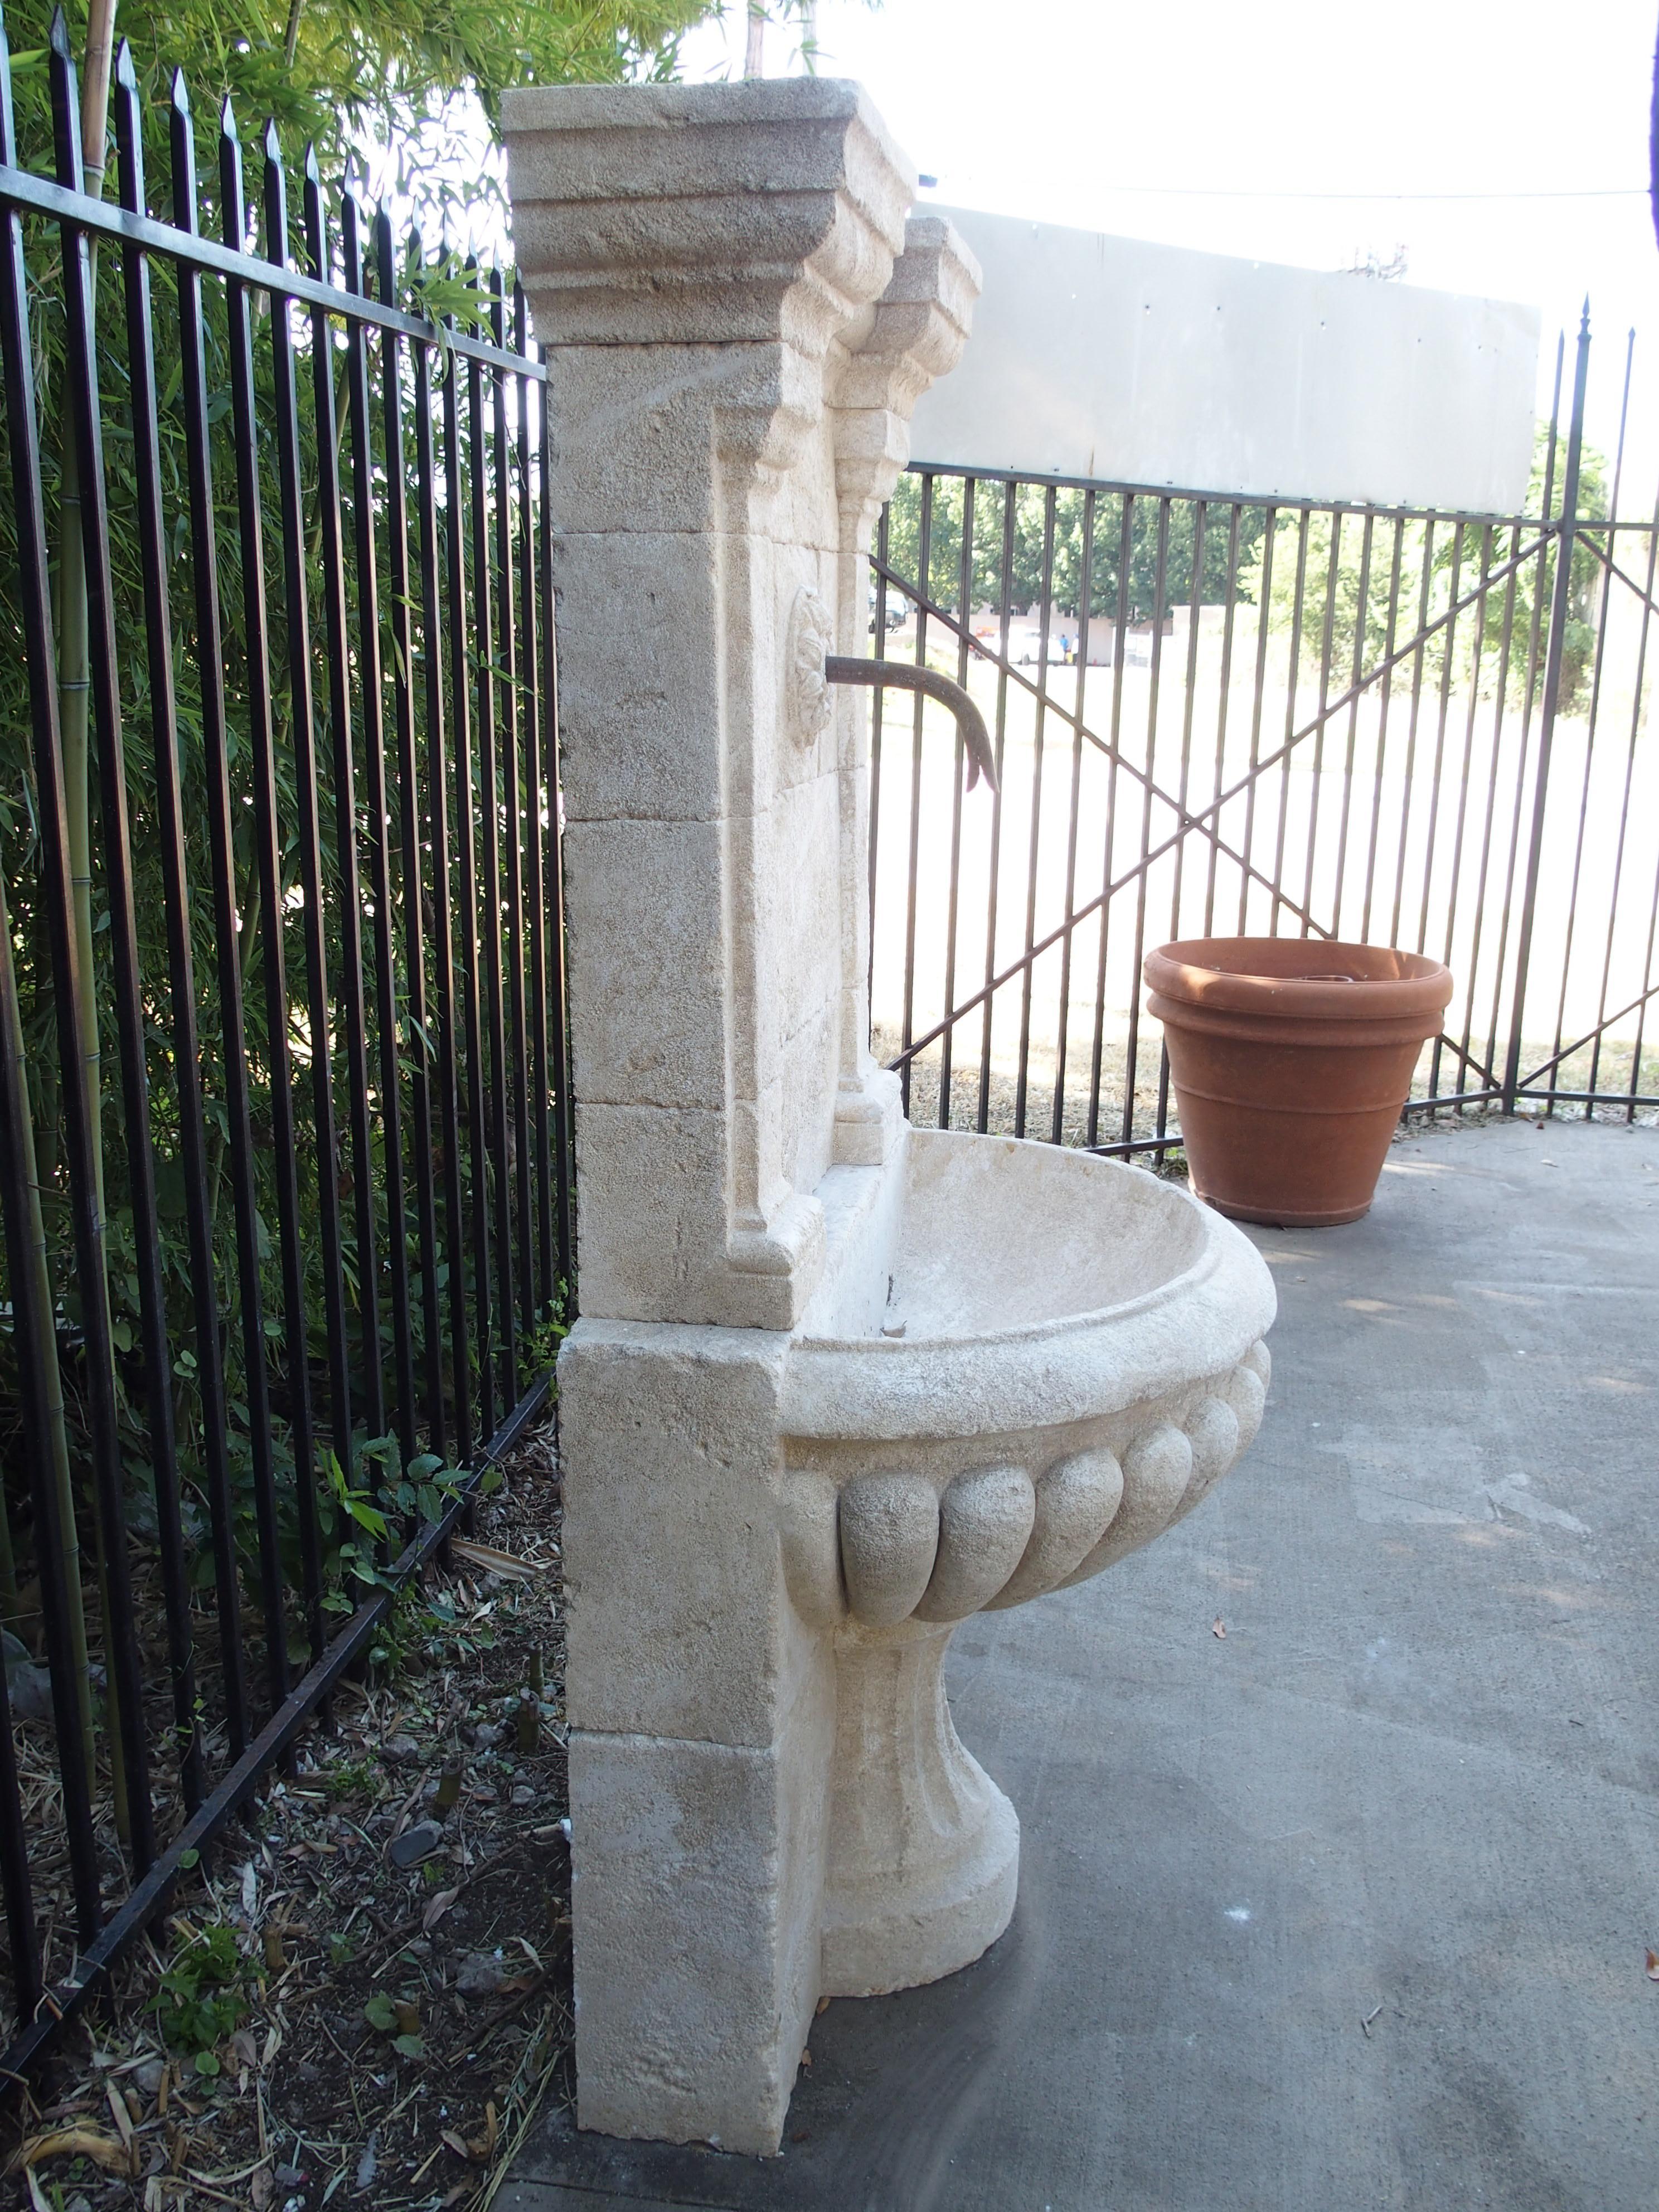 This stunning, hand carved wall fountain from France has been designed with architectural ornamentation. There is a crown molding with pilaster capitals and pilasters on either side ending in a plinth at the lobed basin. It is handmade from